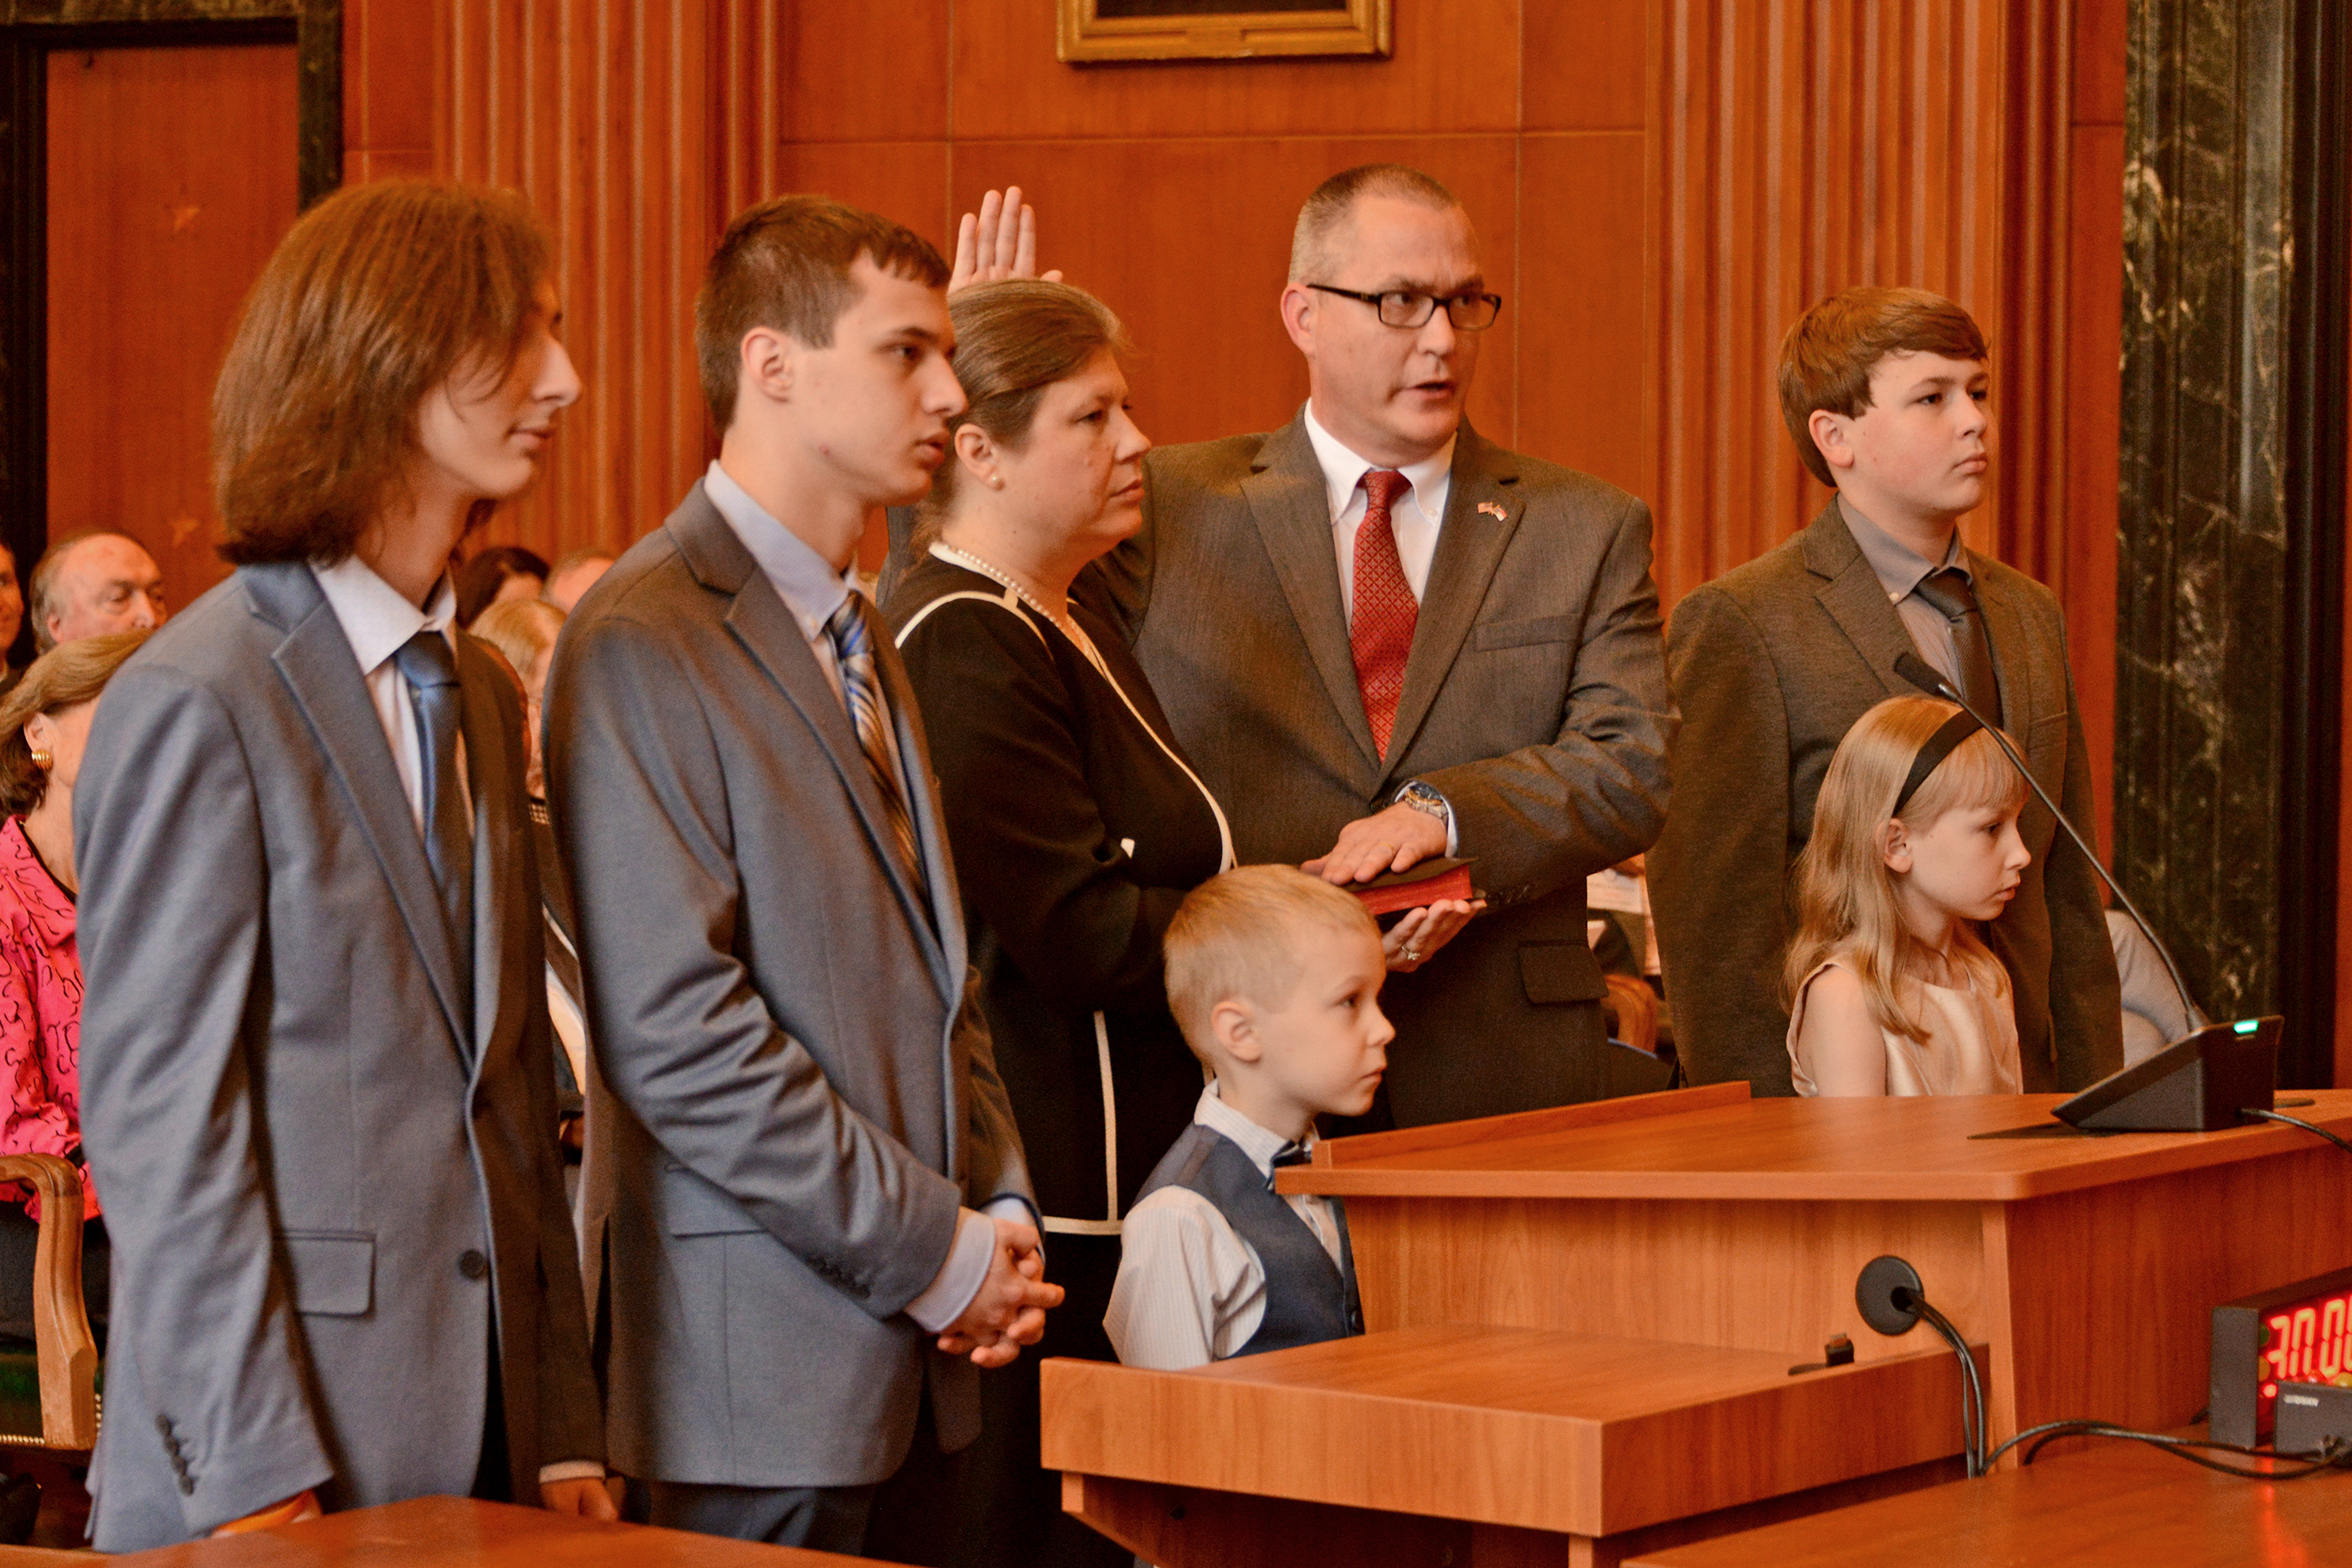 Trey Allen takes his oath of office in a formal court room with his left hand on a Bible and his right hand raised. His wife holds the Bible and they are joined by their four sons and one daughter.